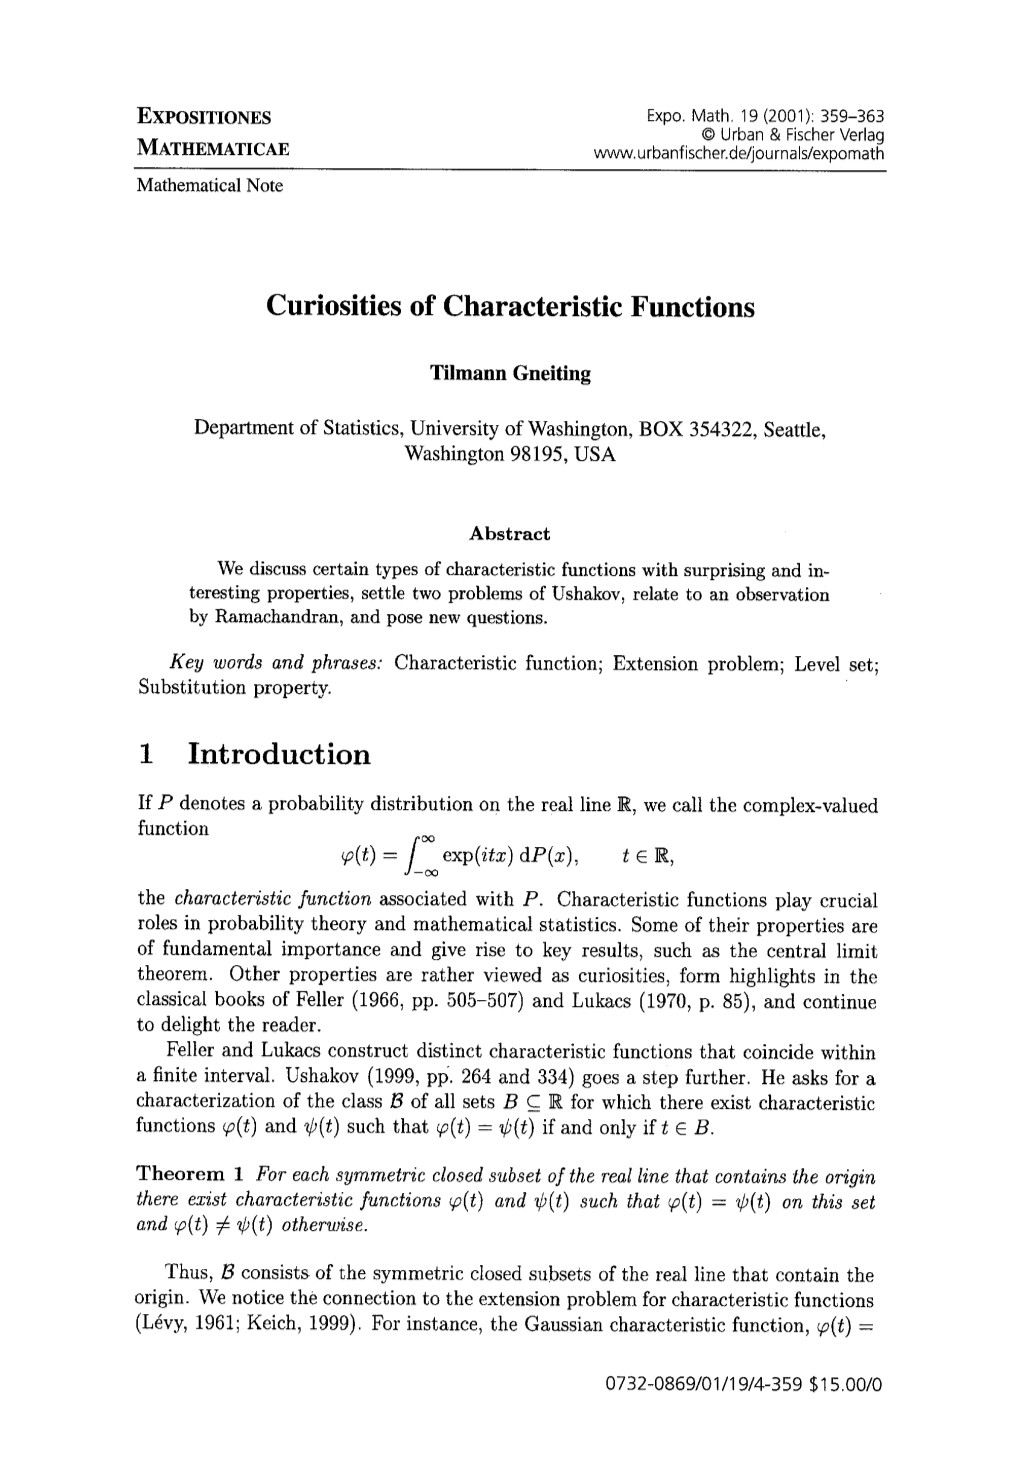 Curiosities of Characteristic Functions 1 Introduction